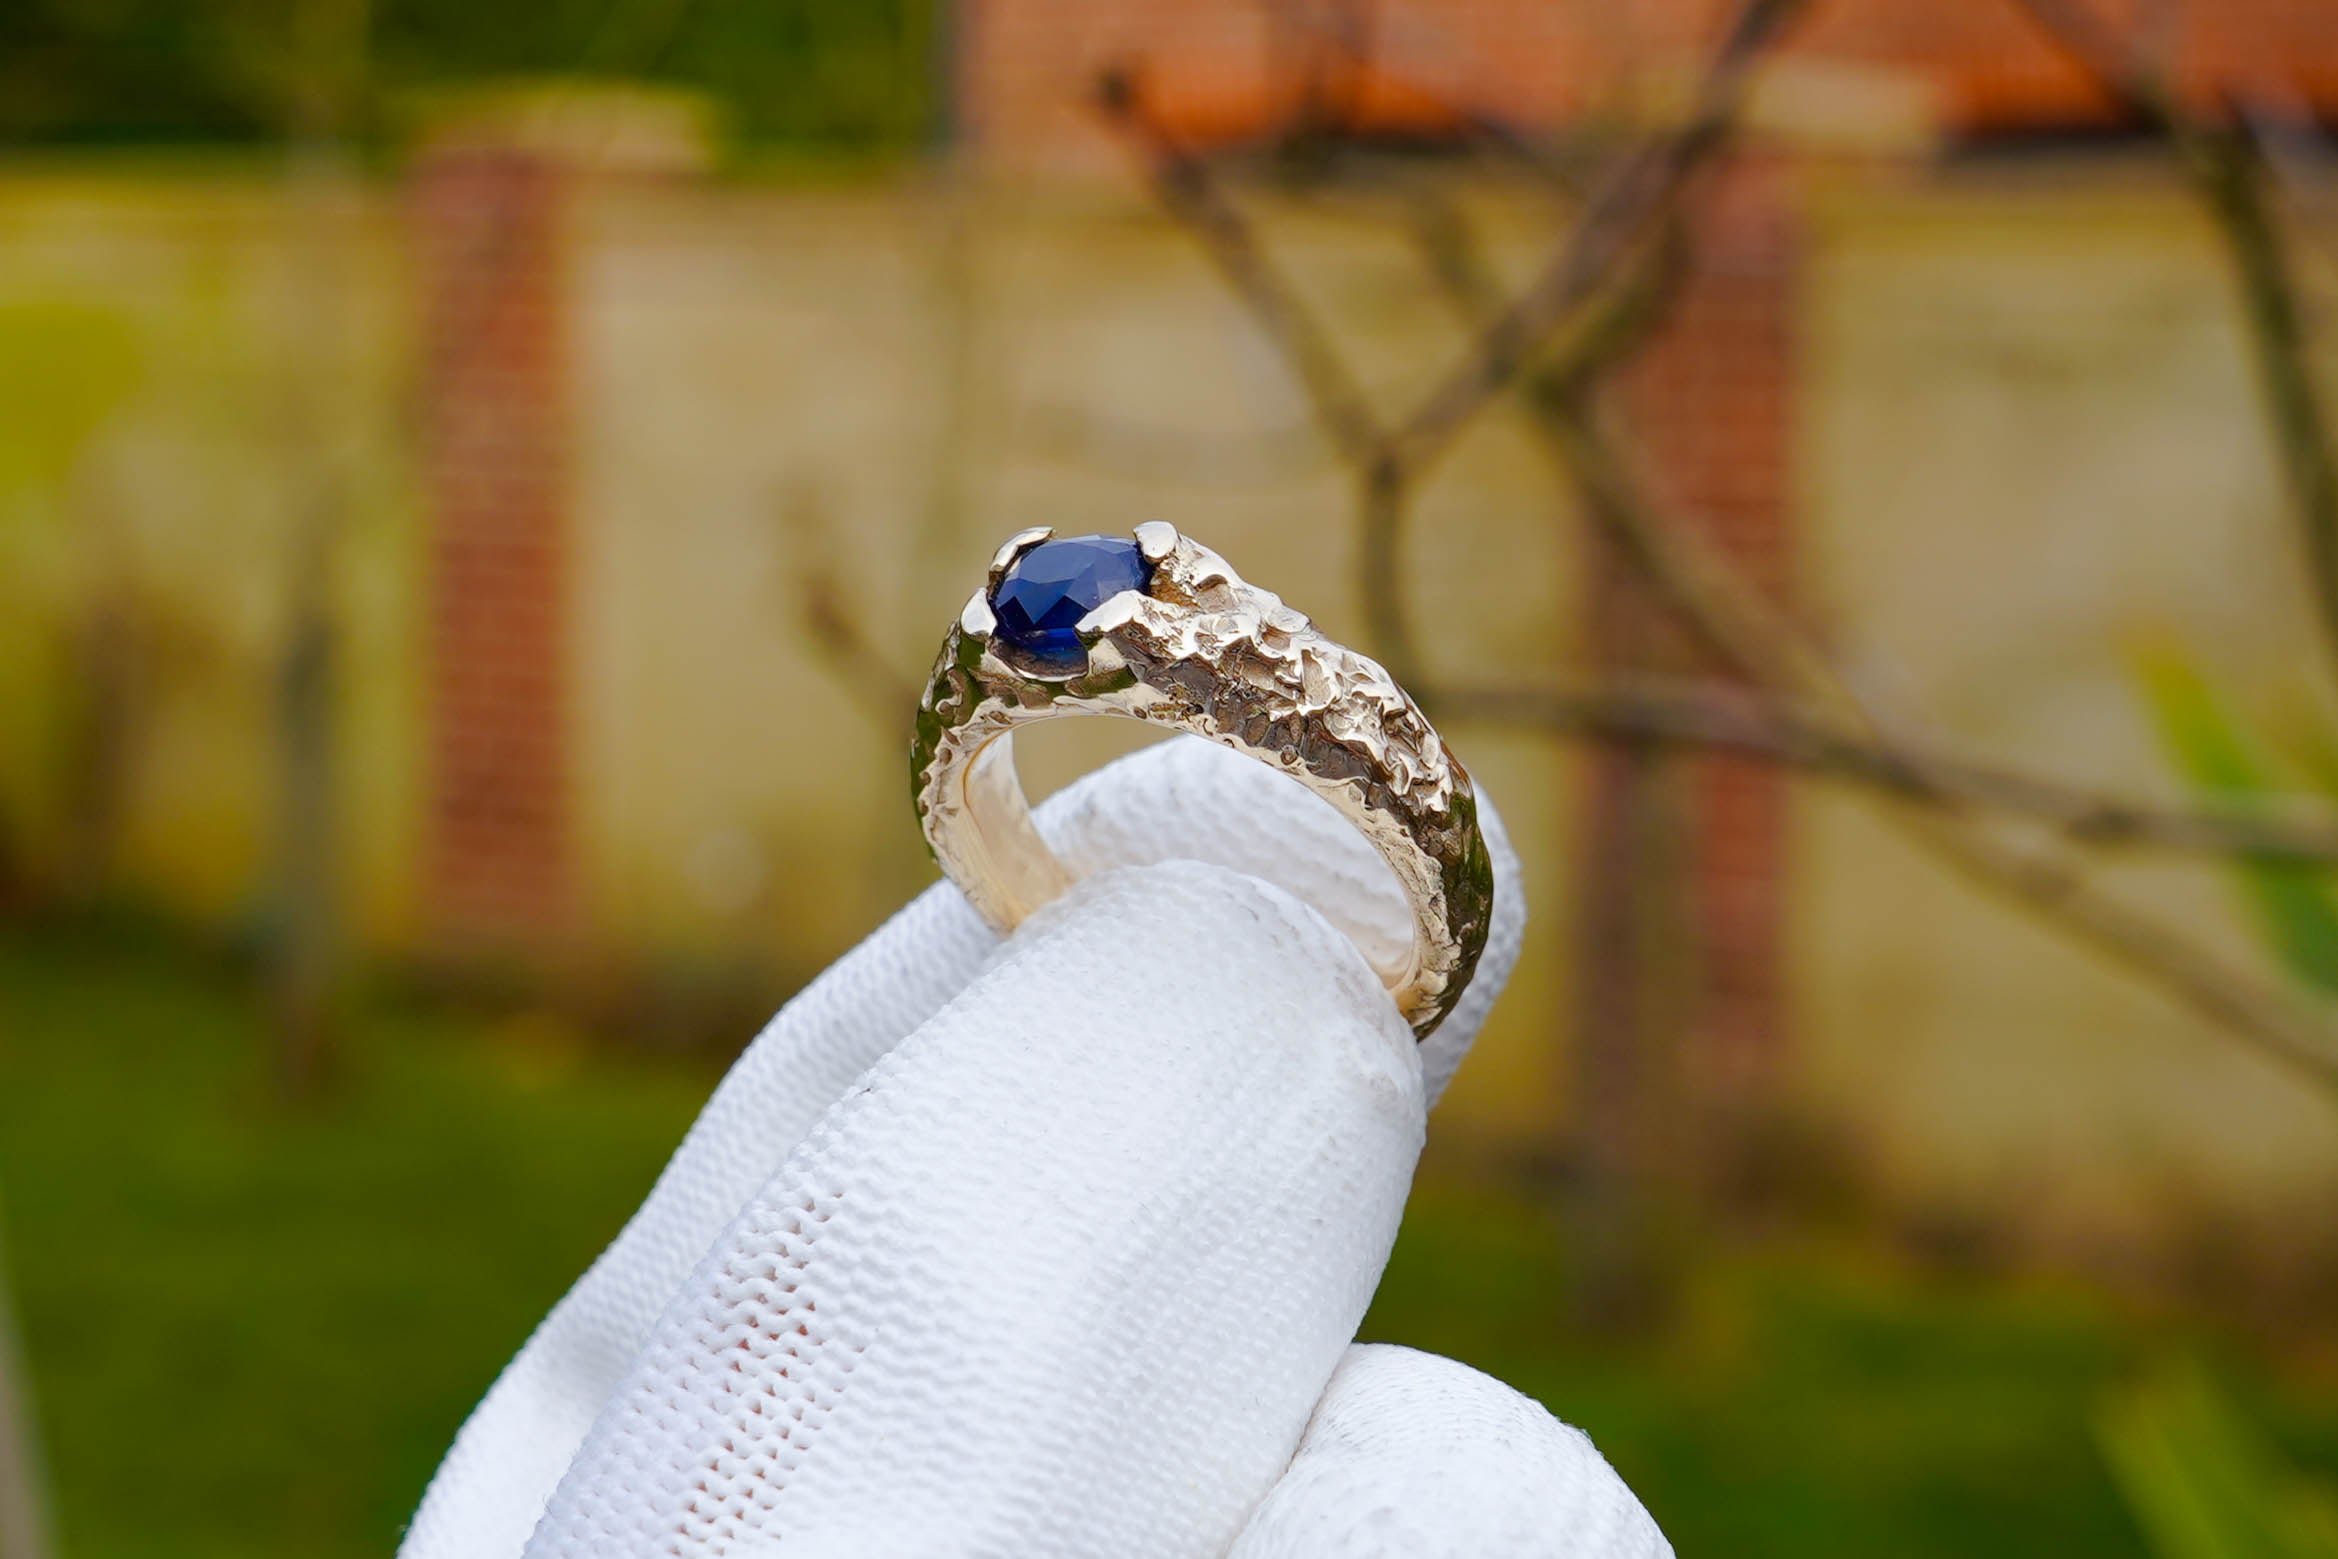 Hand in a white glove holding a bespoke sapphire ring made by Independent jeweller Luke Brient